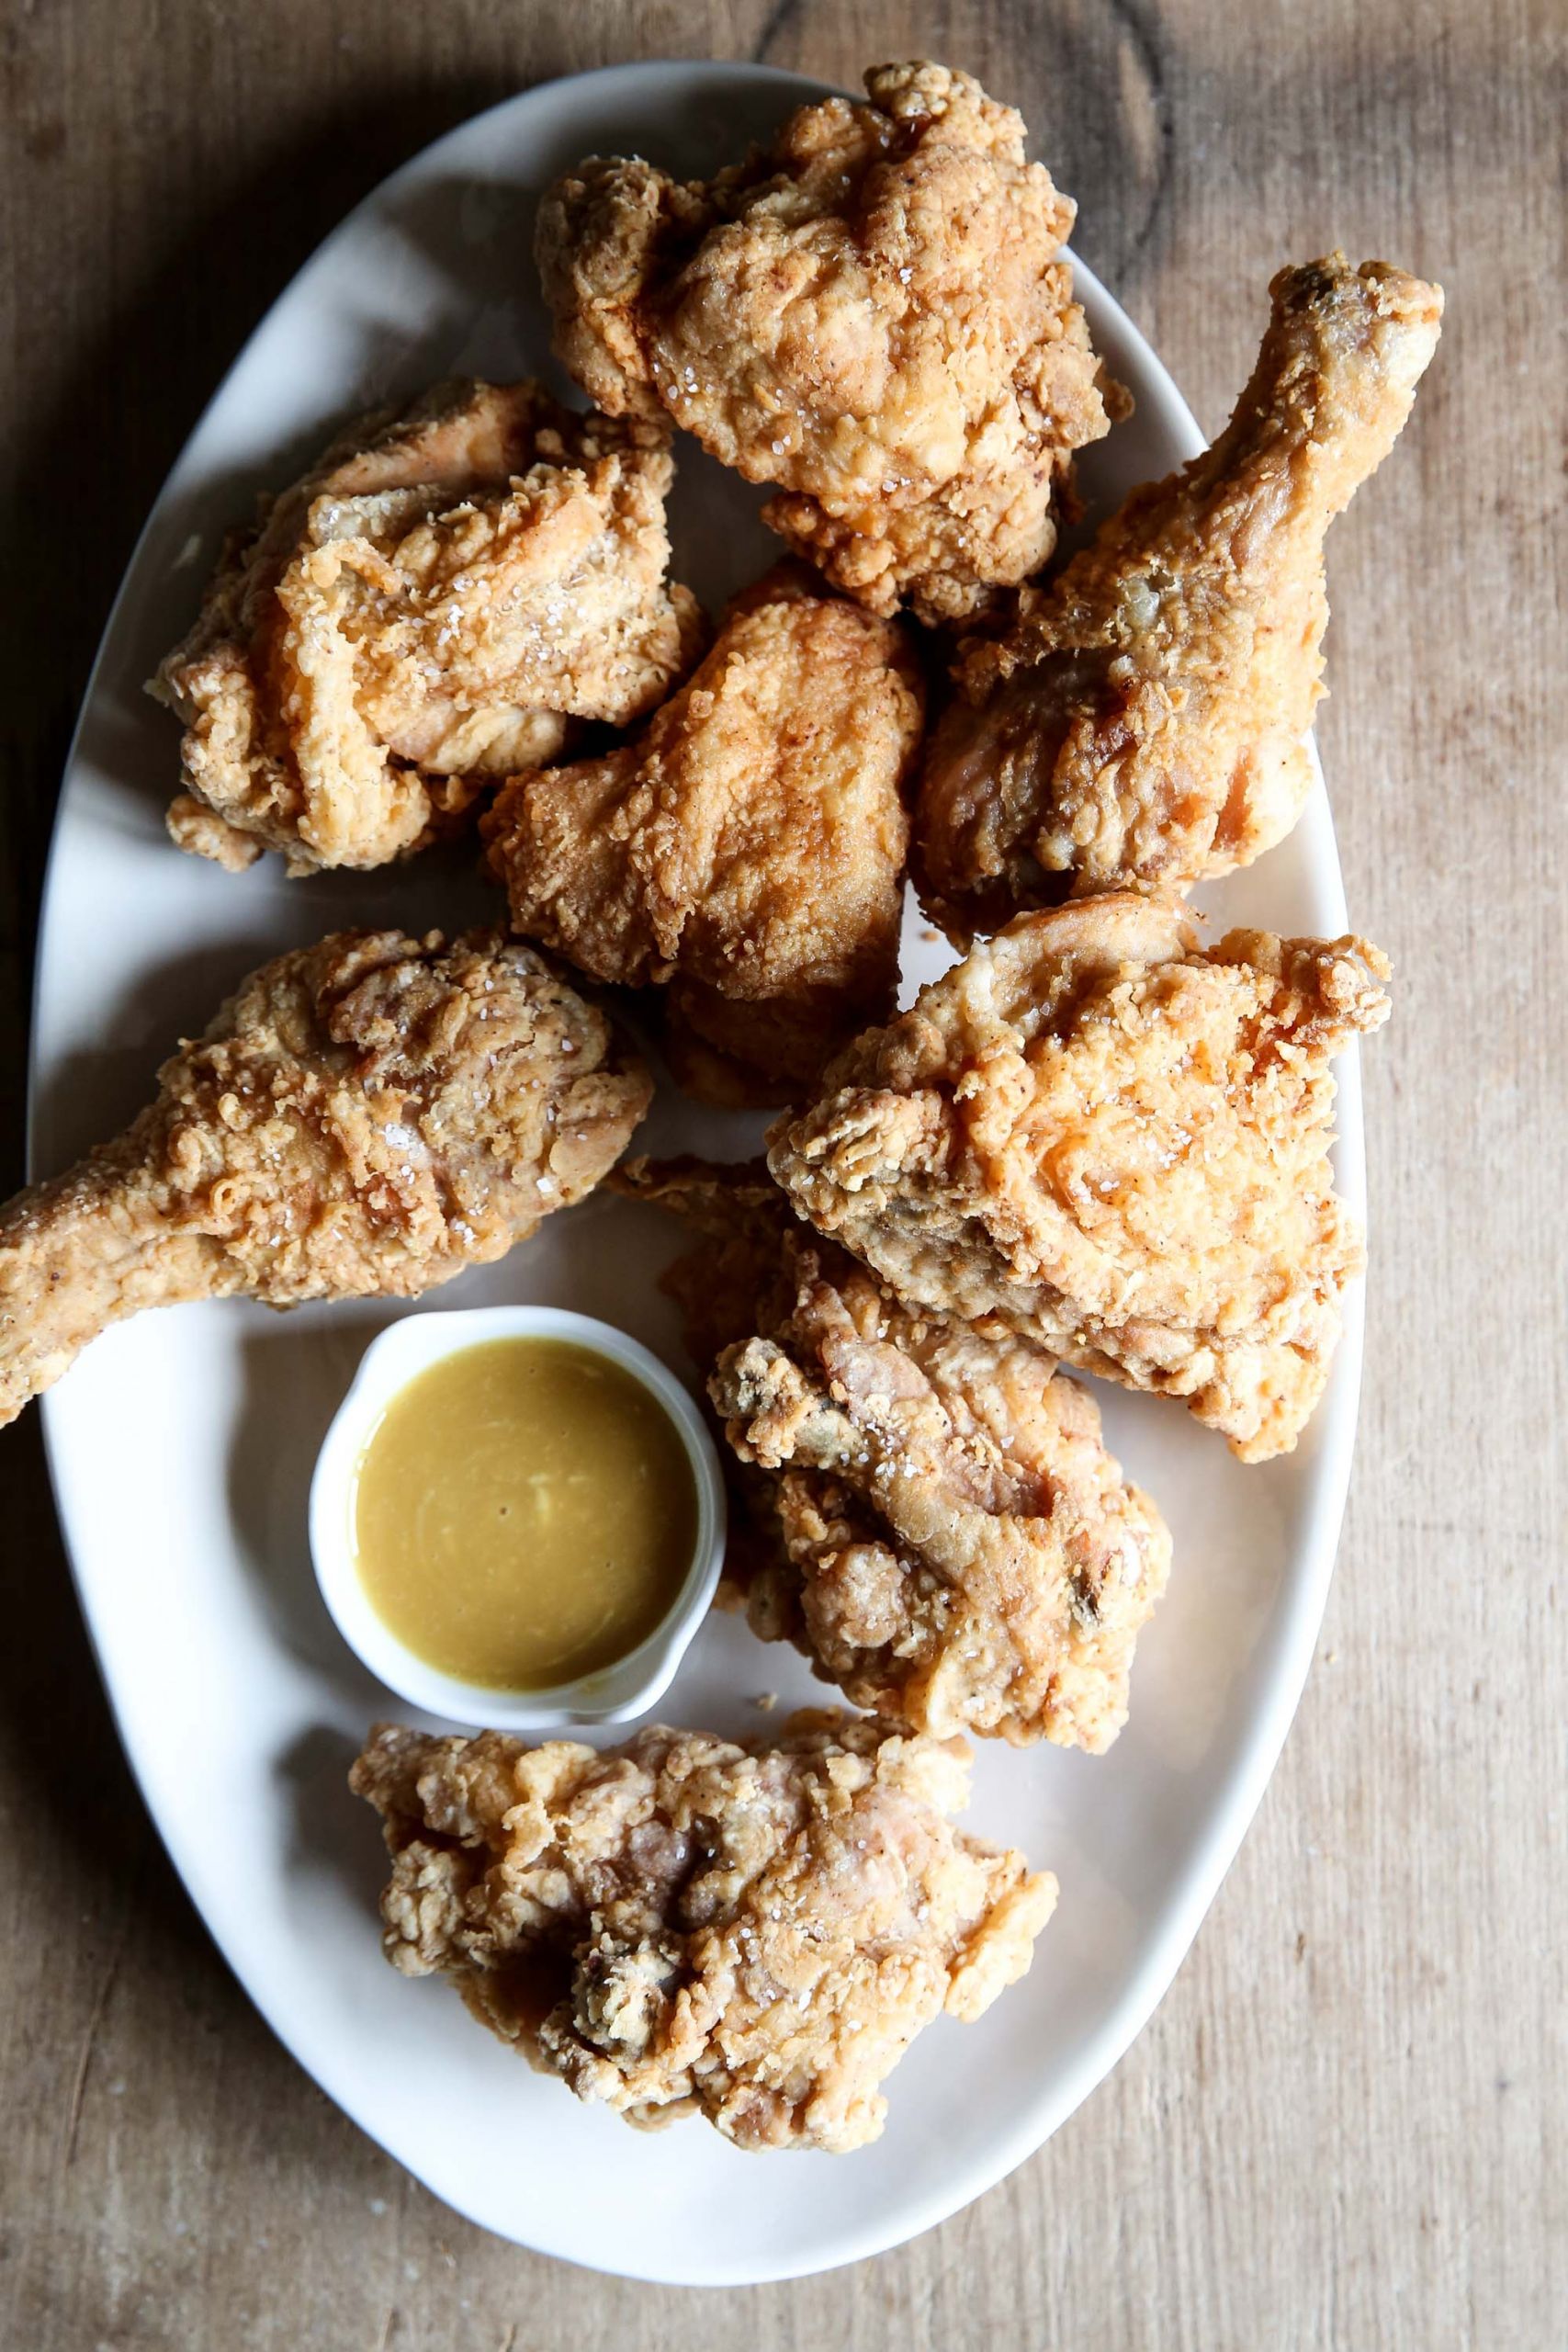 Best Oven Fried Chicken
 14 Best Fried Chicken Recipes How to Make Oven Fried and